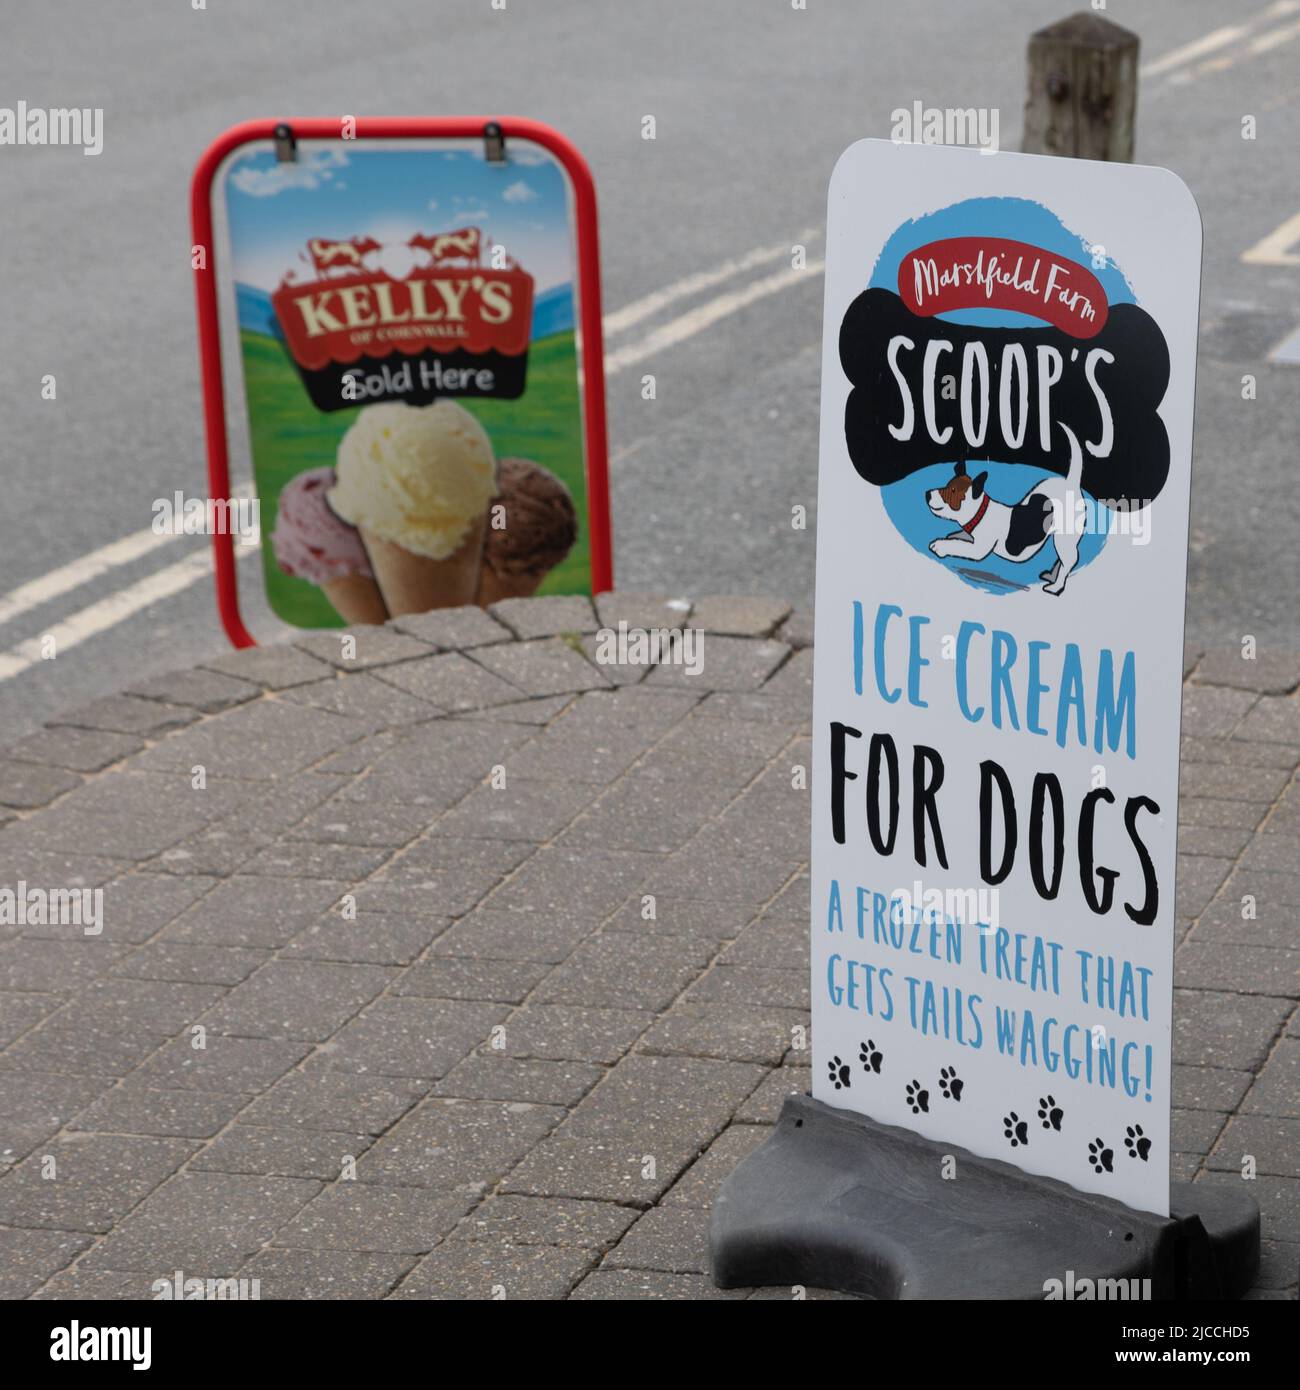 Ice Cream for dogs sign Stock Photo